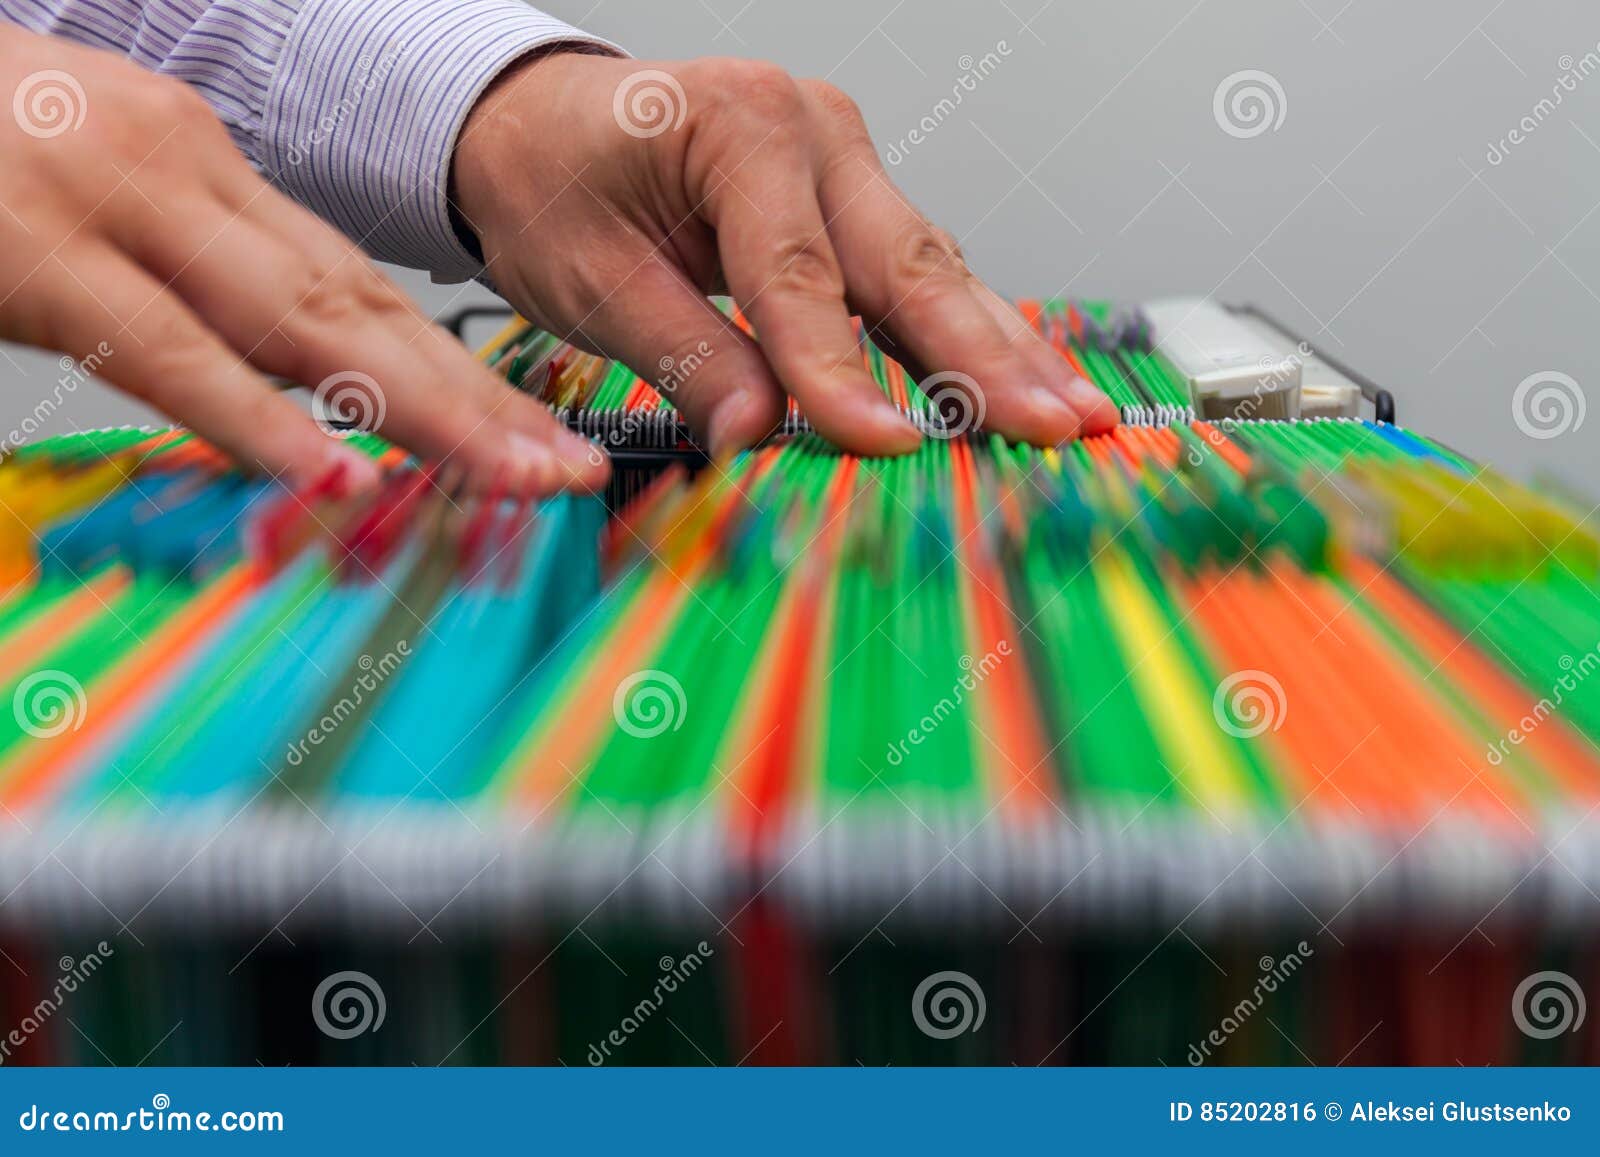 abstract background colorful hanging file folders in drawer. male hands looking document in a whole pile of full papers